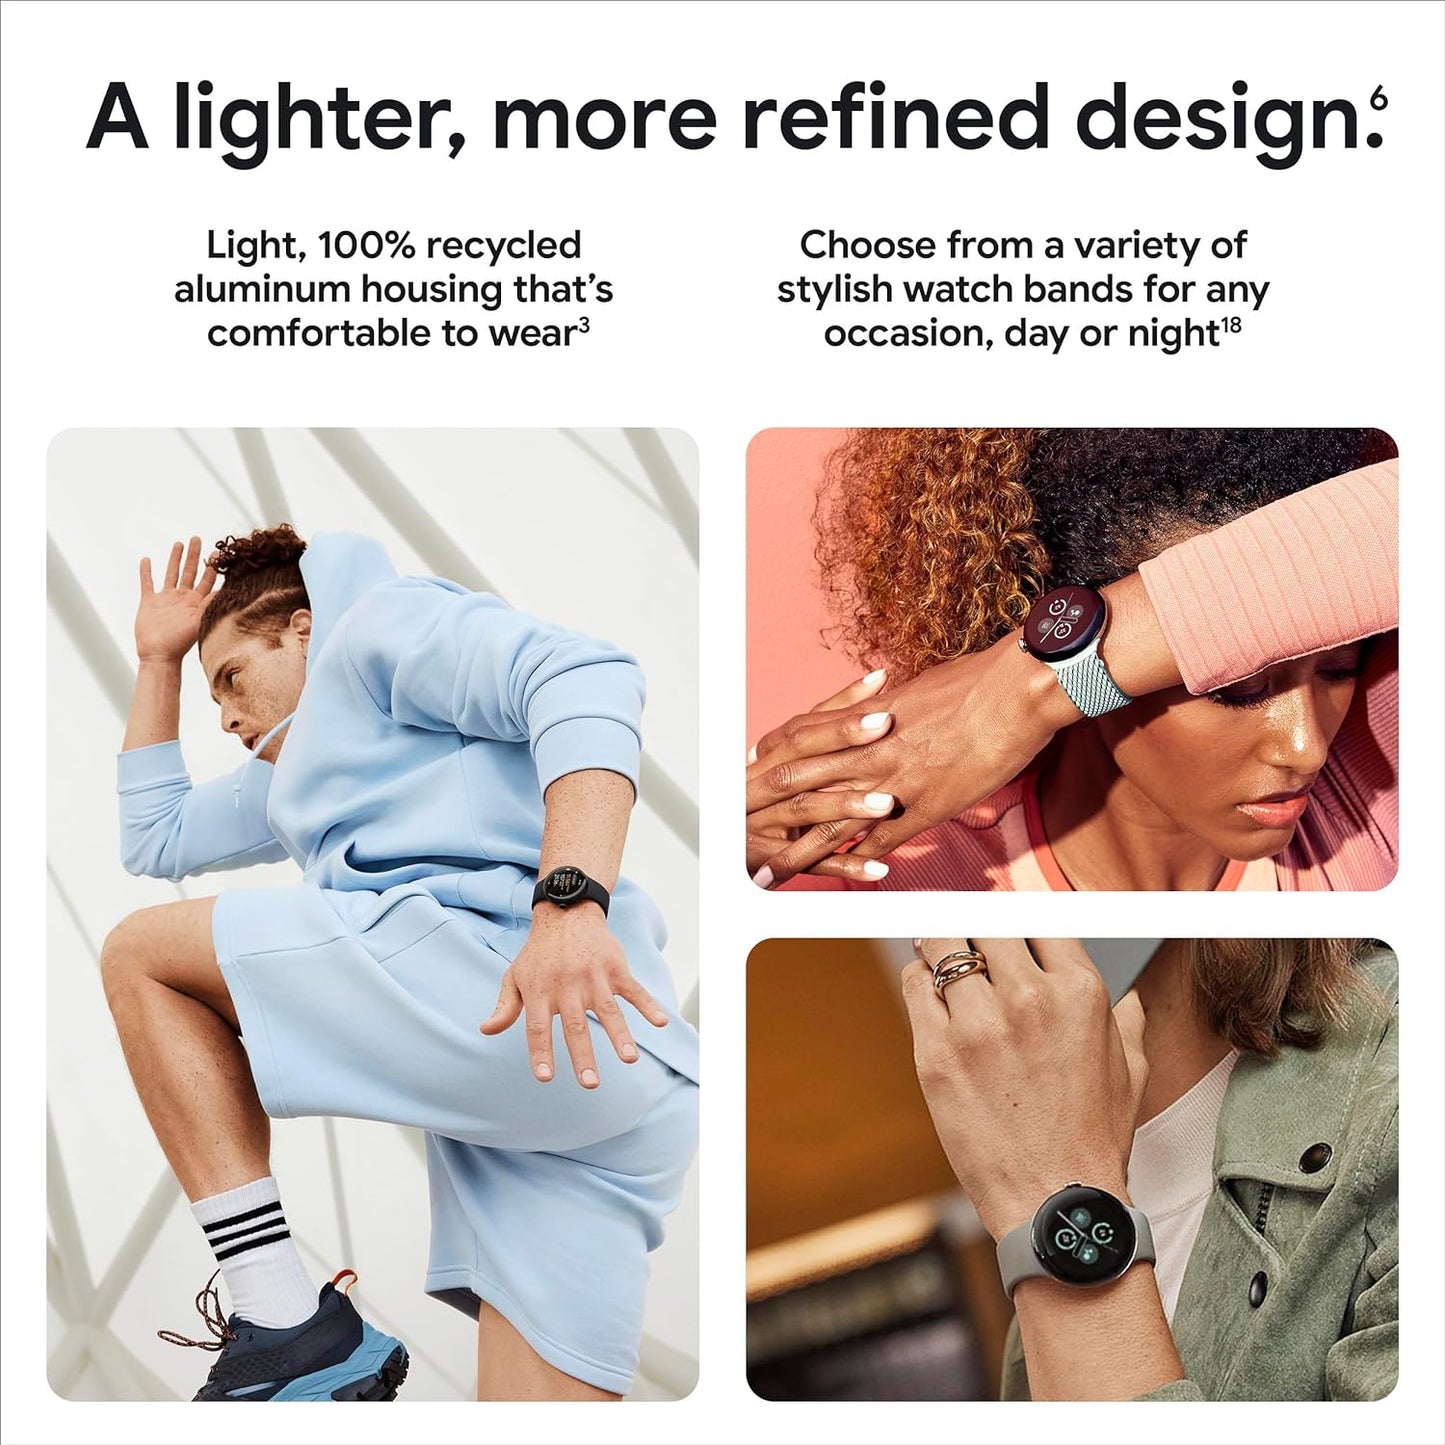 Google Pixel Watch 2 with the Best of Fitbit and Google - Heart Rate Tracking, Stress Management, Safety Features - Android Smartwatch